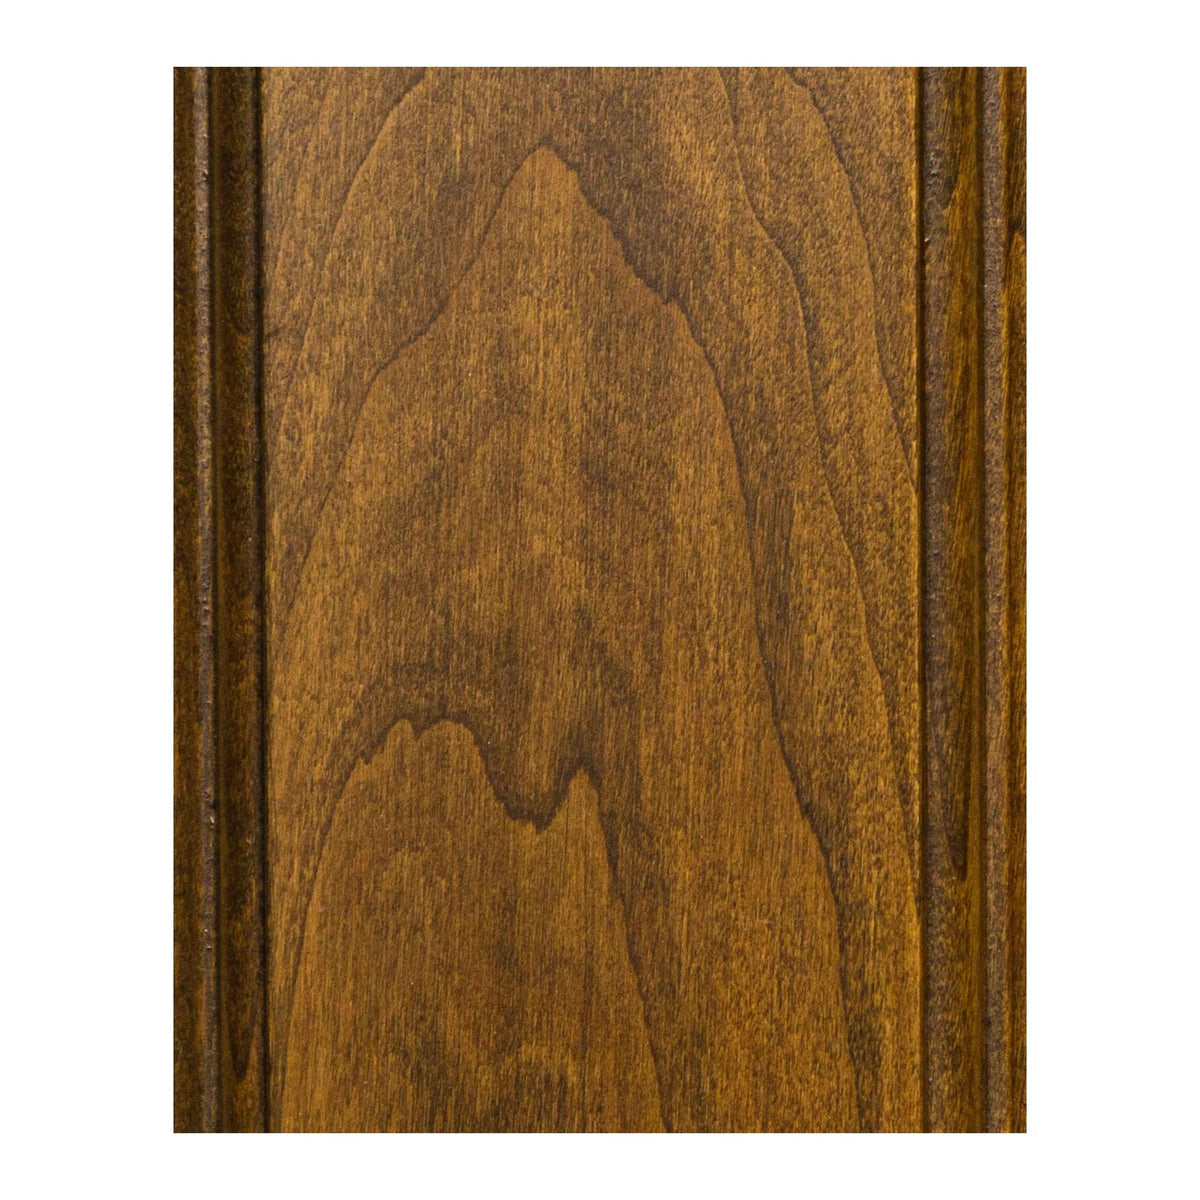 Lebanon Valley Wood Color Sample - snyders.furniture